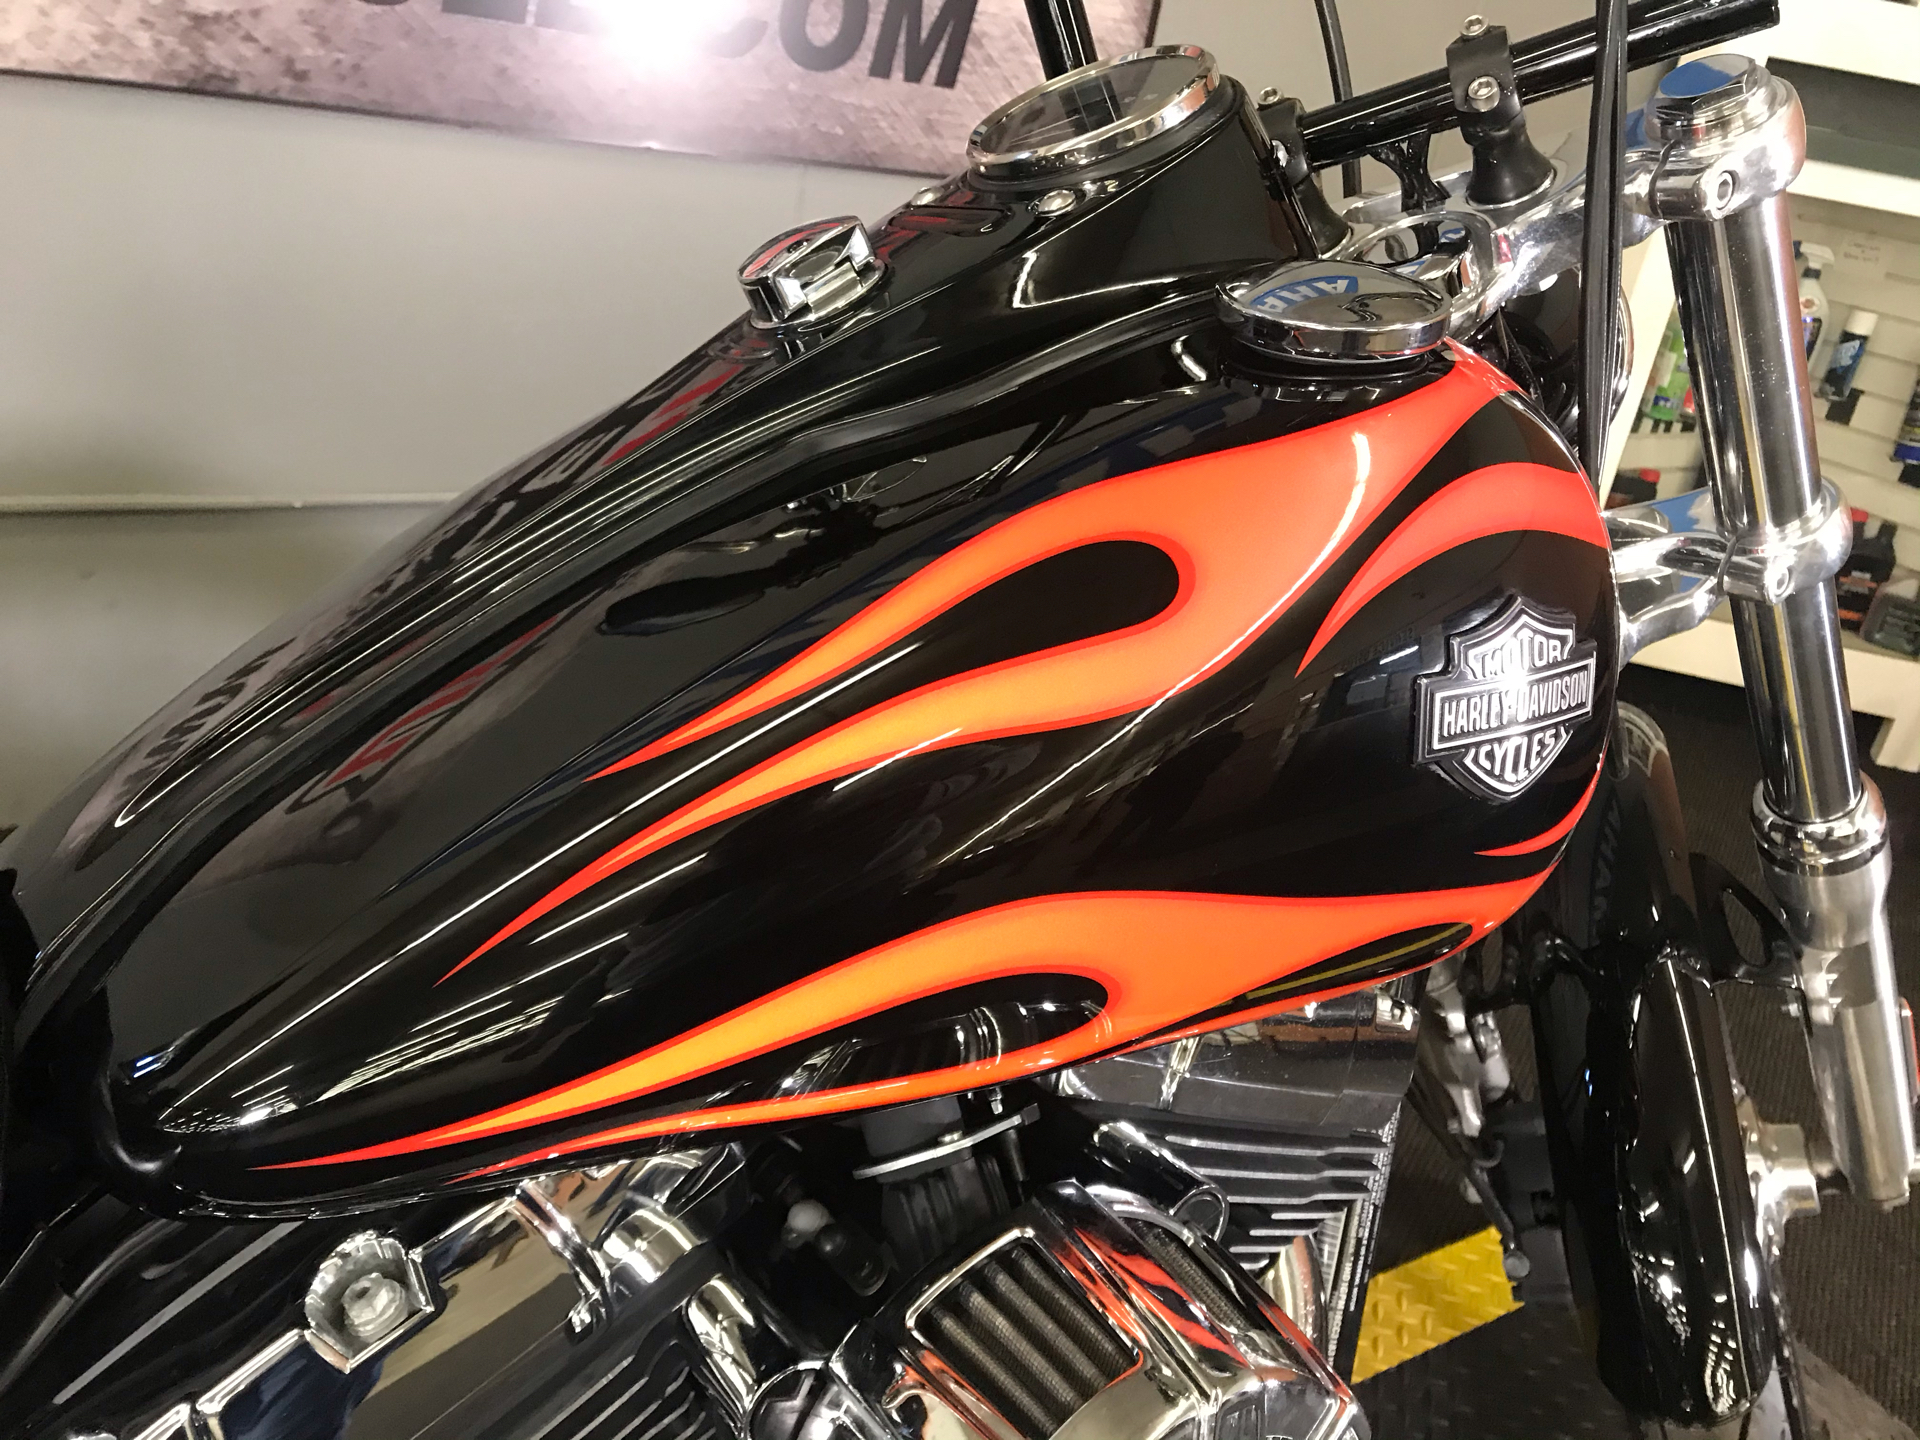 Used 2012 Harley Davidson Dyna Wide Glide Motorcycles In Tyrone Pa 318315 Vivid Black With Flame Graphics